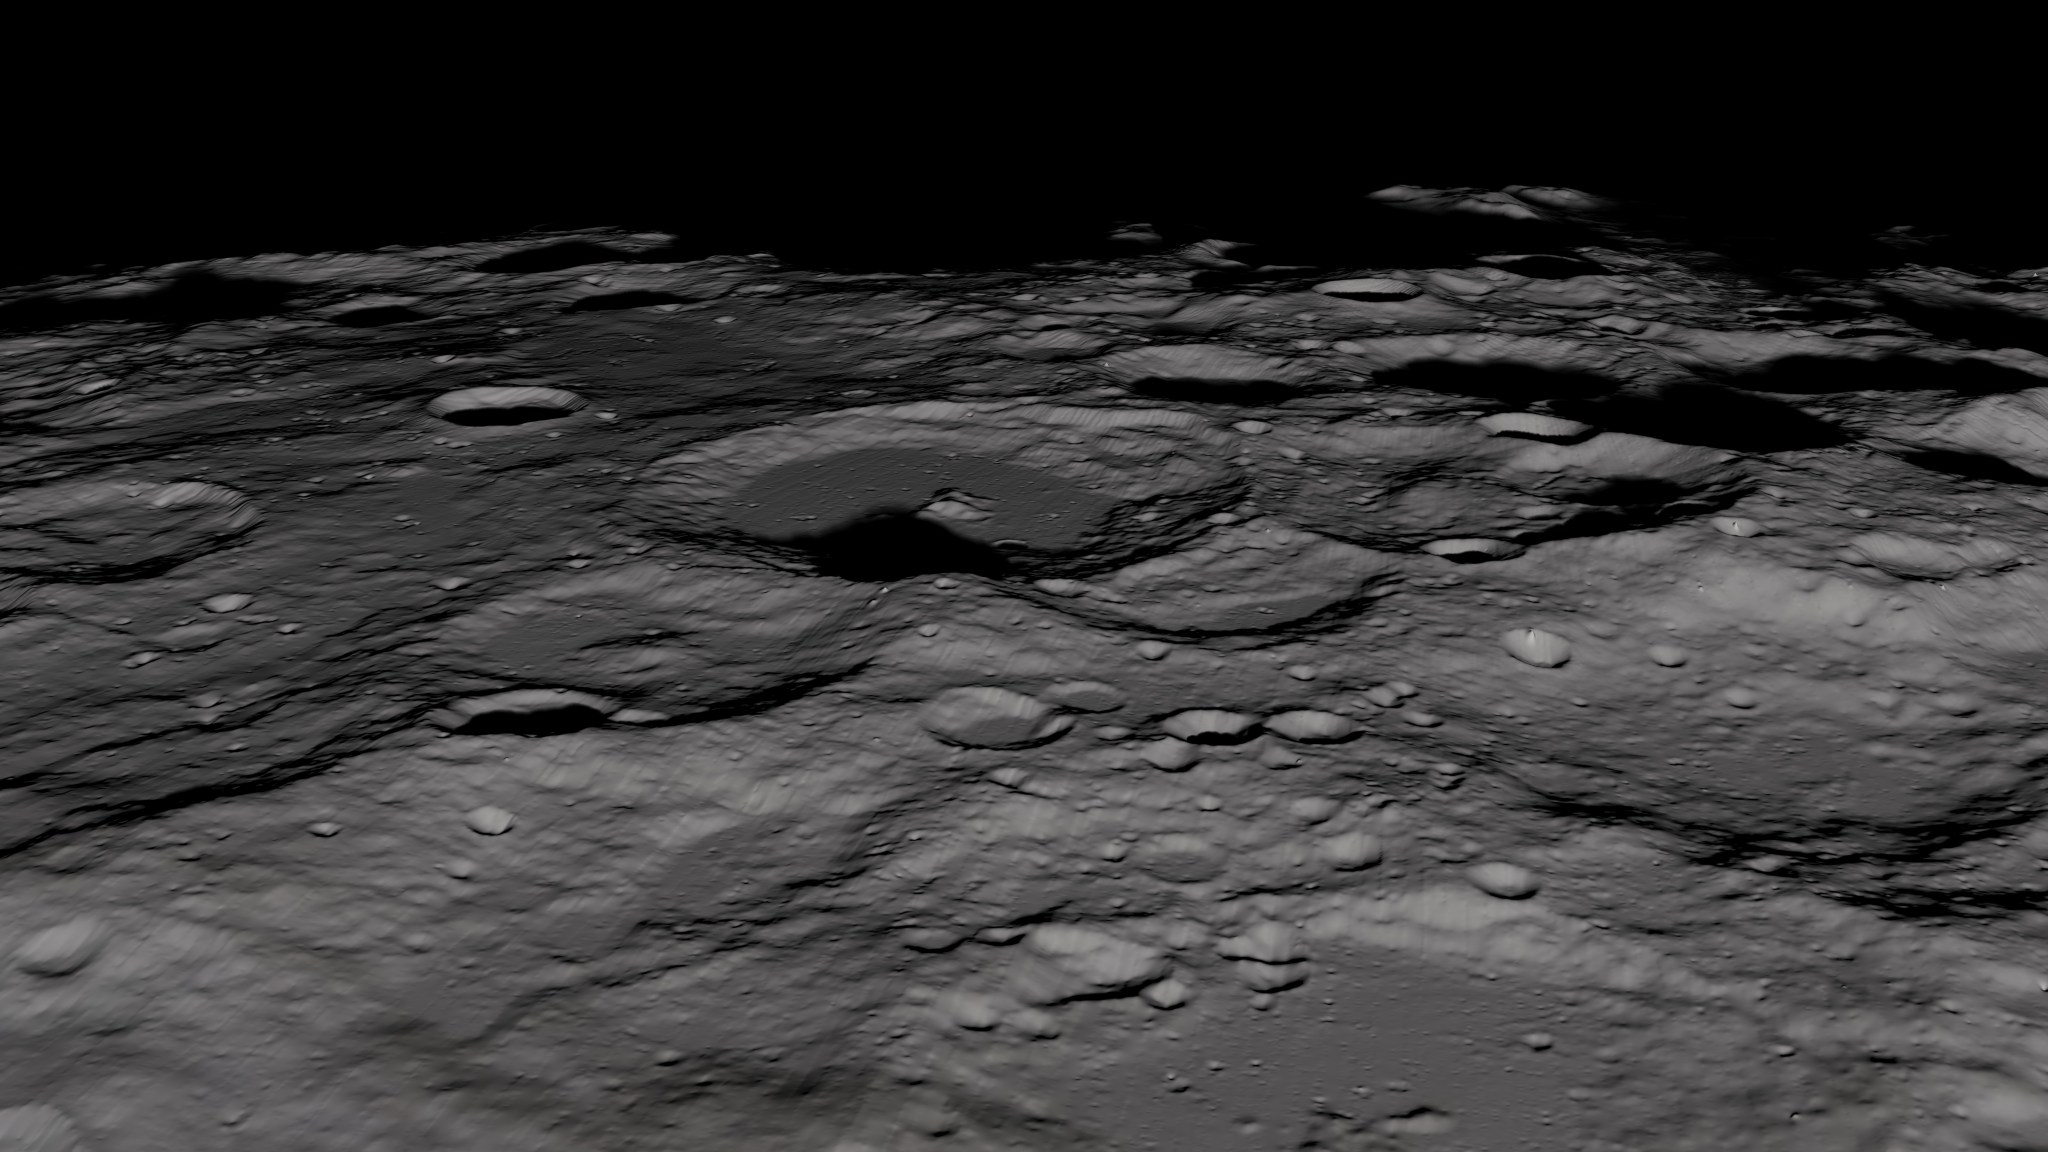 craters fading into darkness